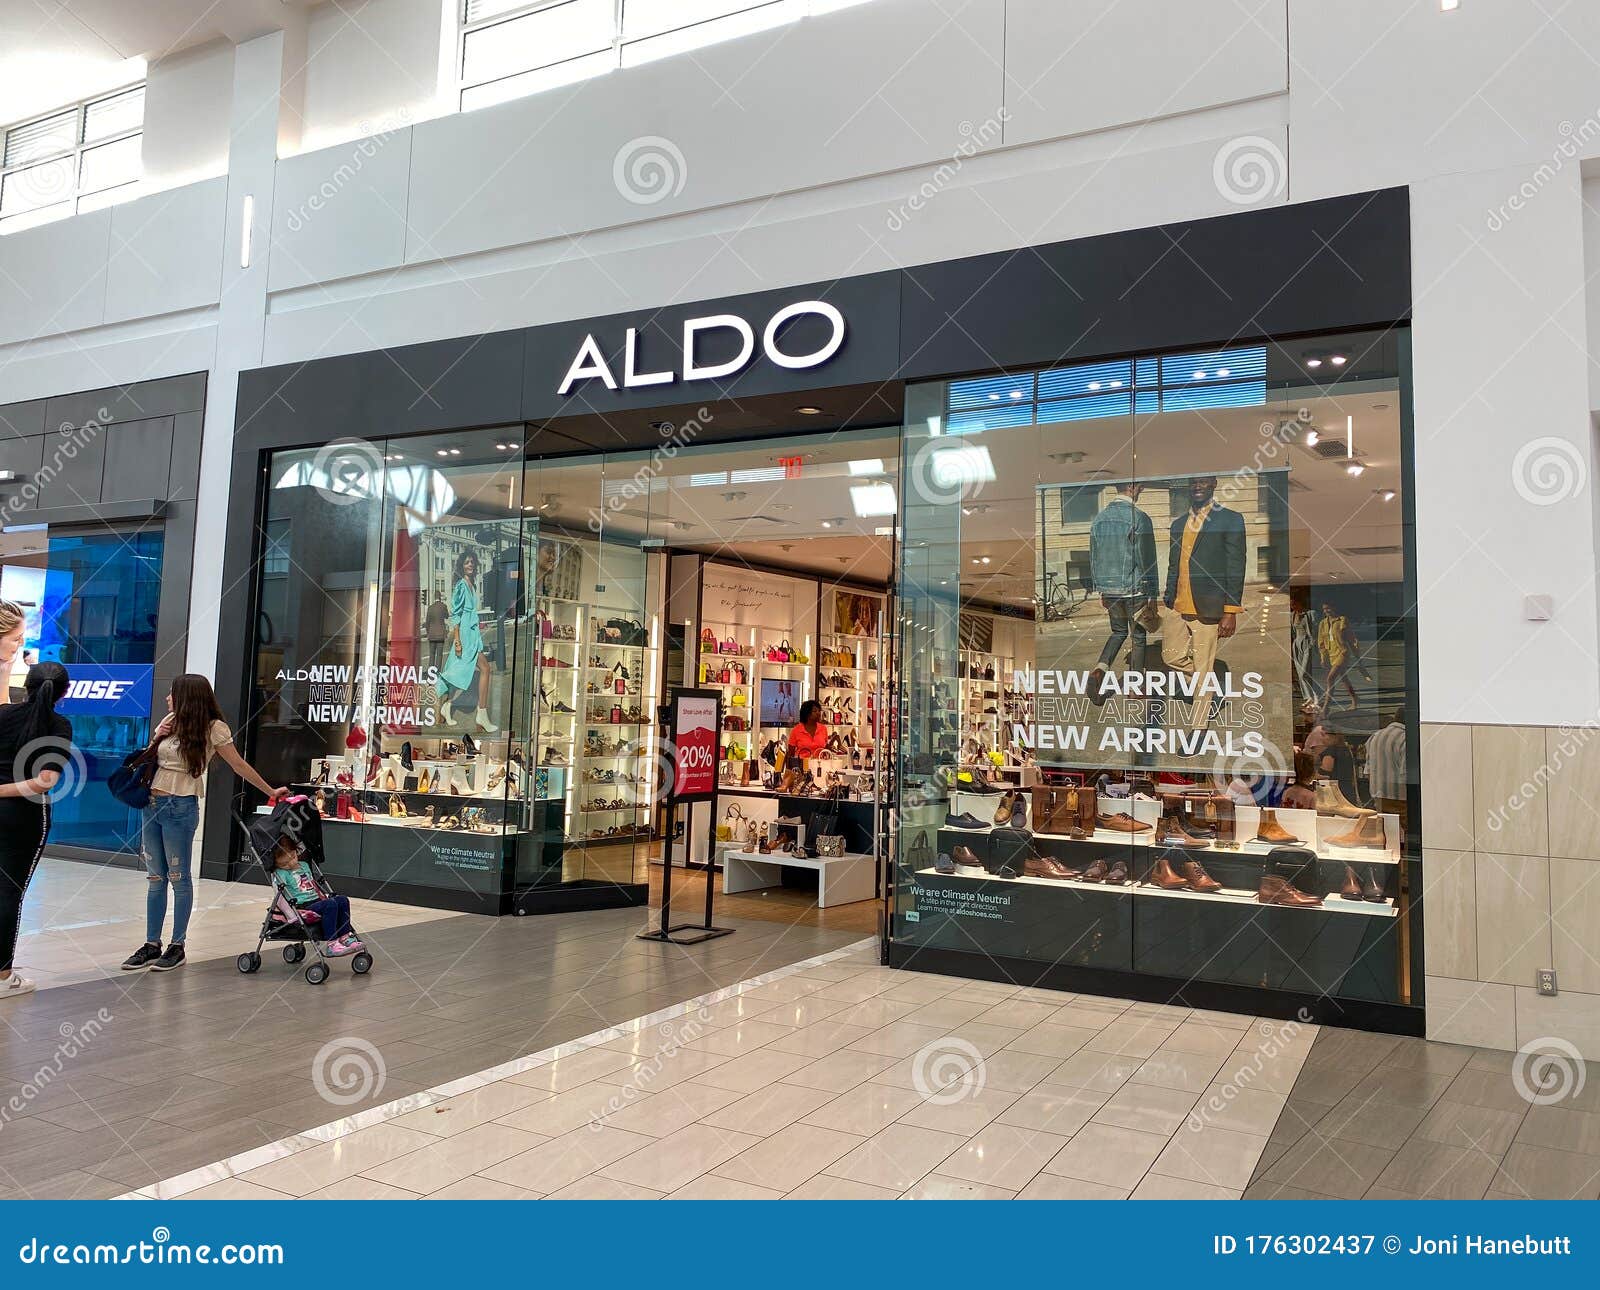 An Aldo Retail Fashion Shoes and Accessories Store in an Indoor Mall in Orlando, FL Editorial Photography - Image display, purse: 176302437